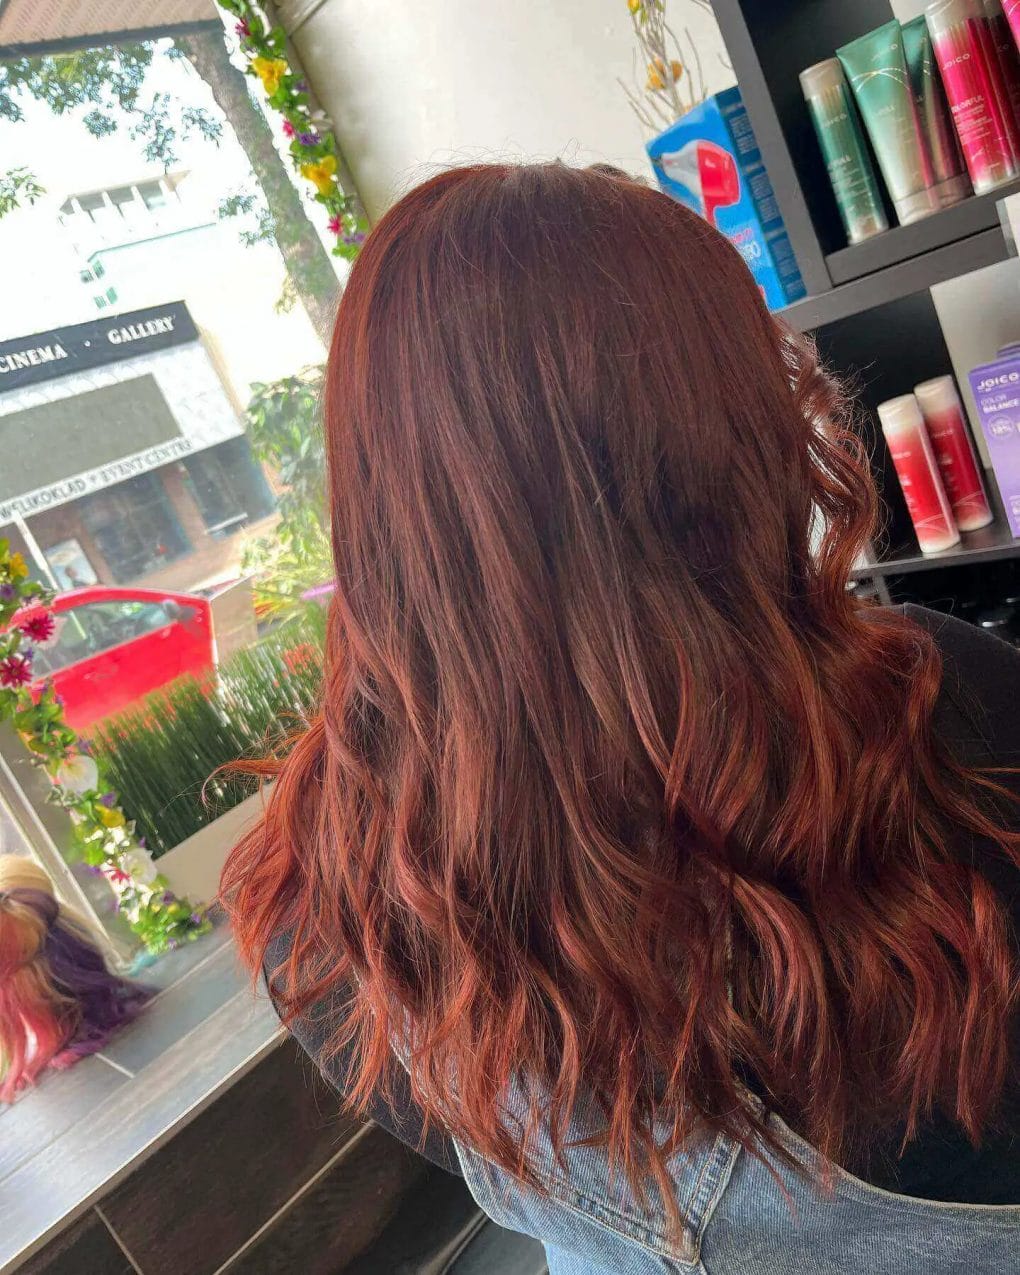 Brunette base with vibrant red balayage, soft waves, and layers.